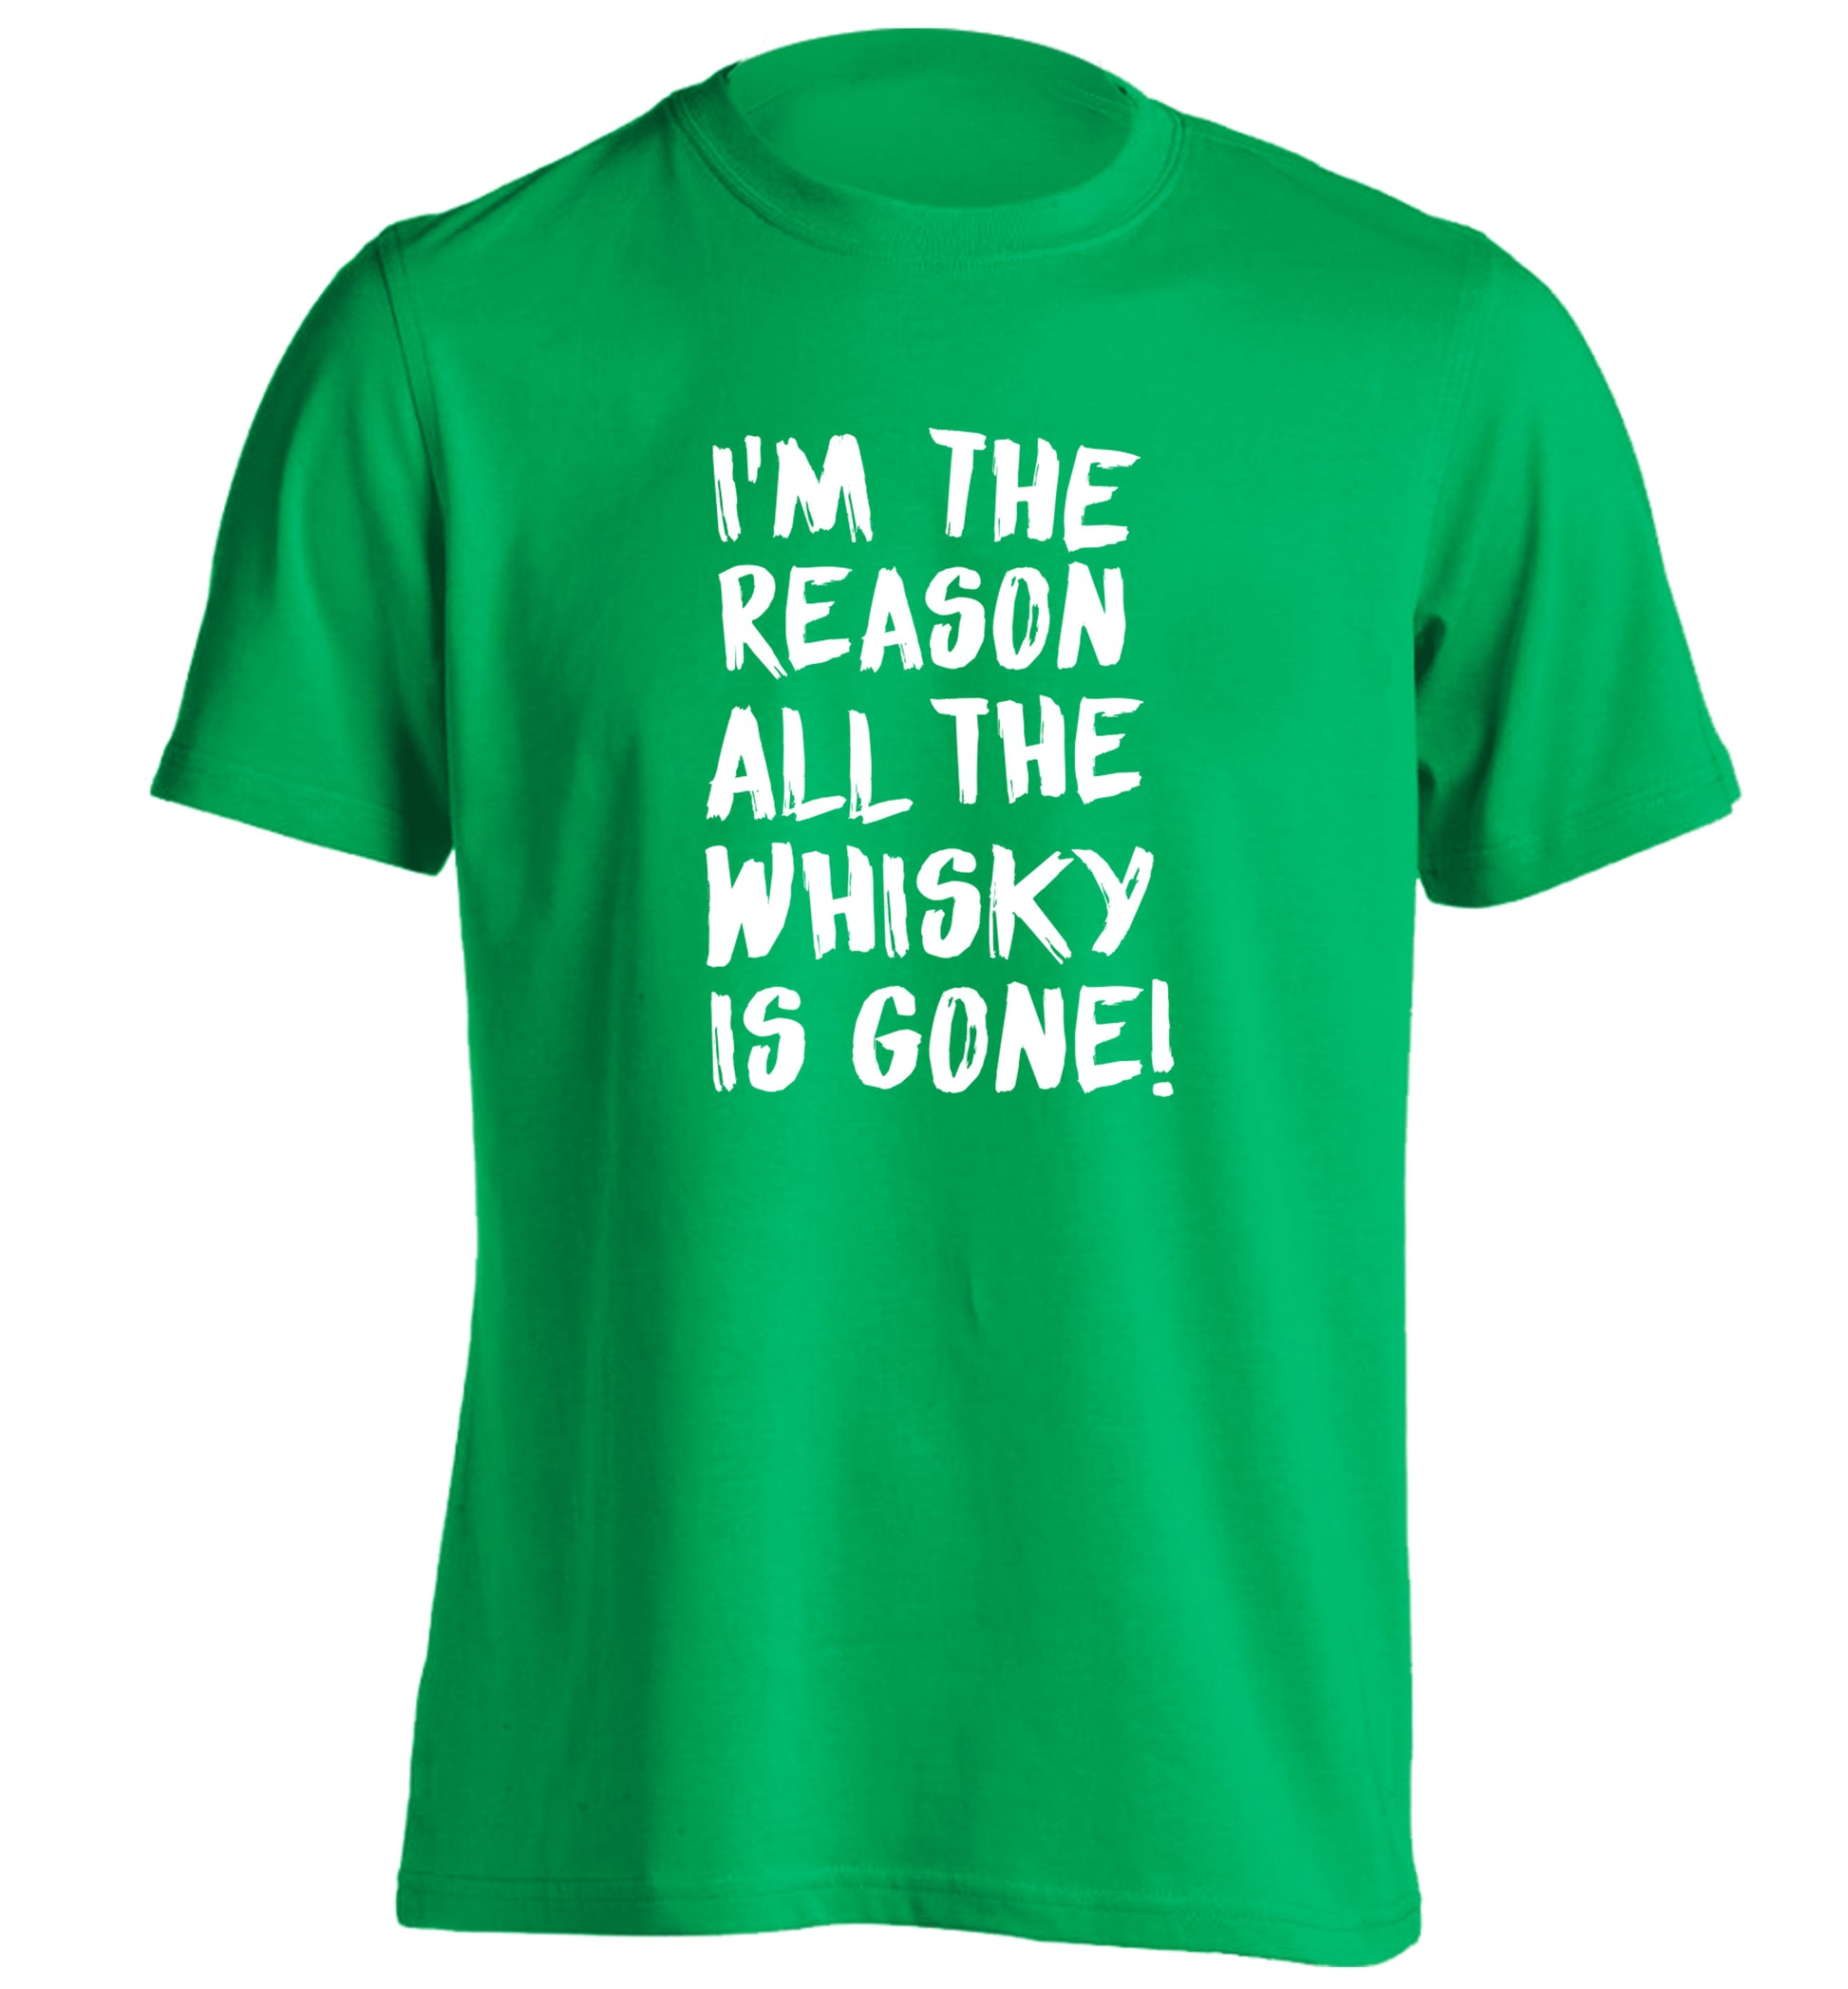 I'm the reason all the whisky is gone adults unisex green Tshirt 2XL